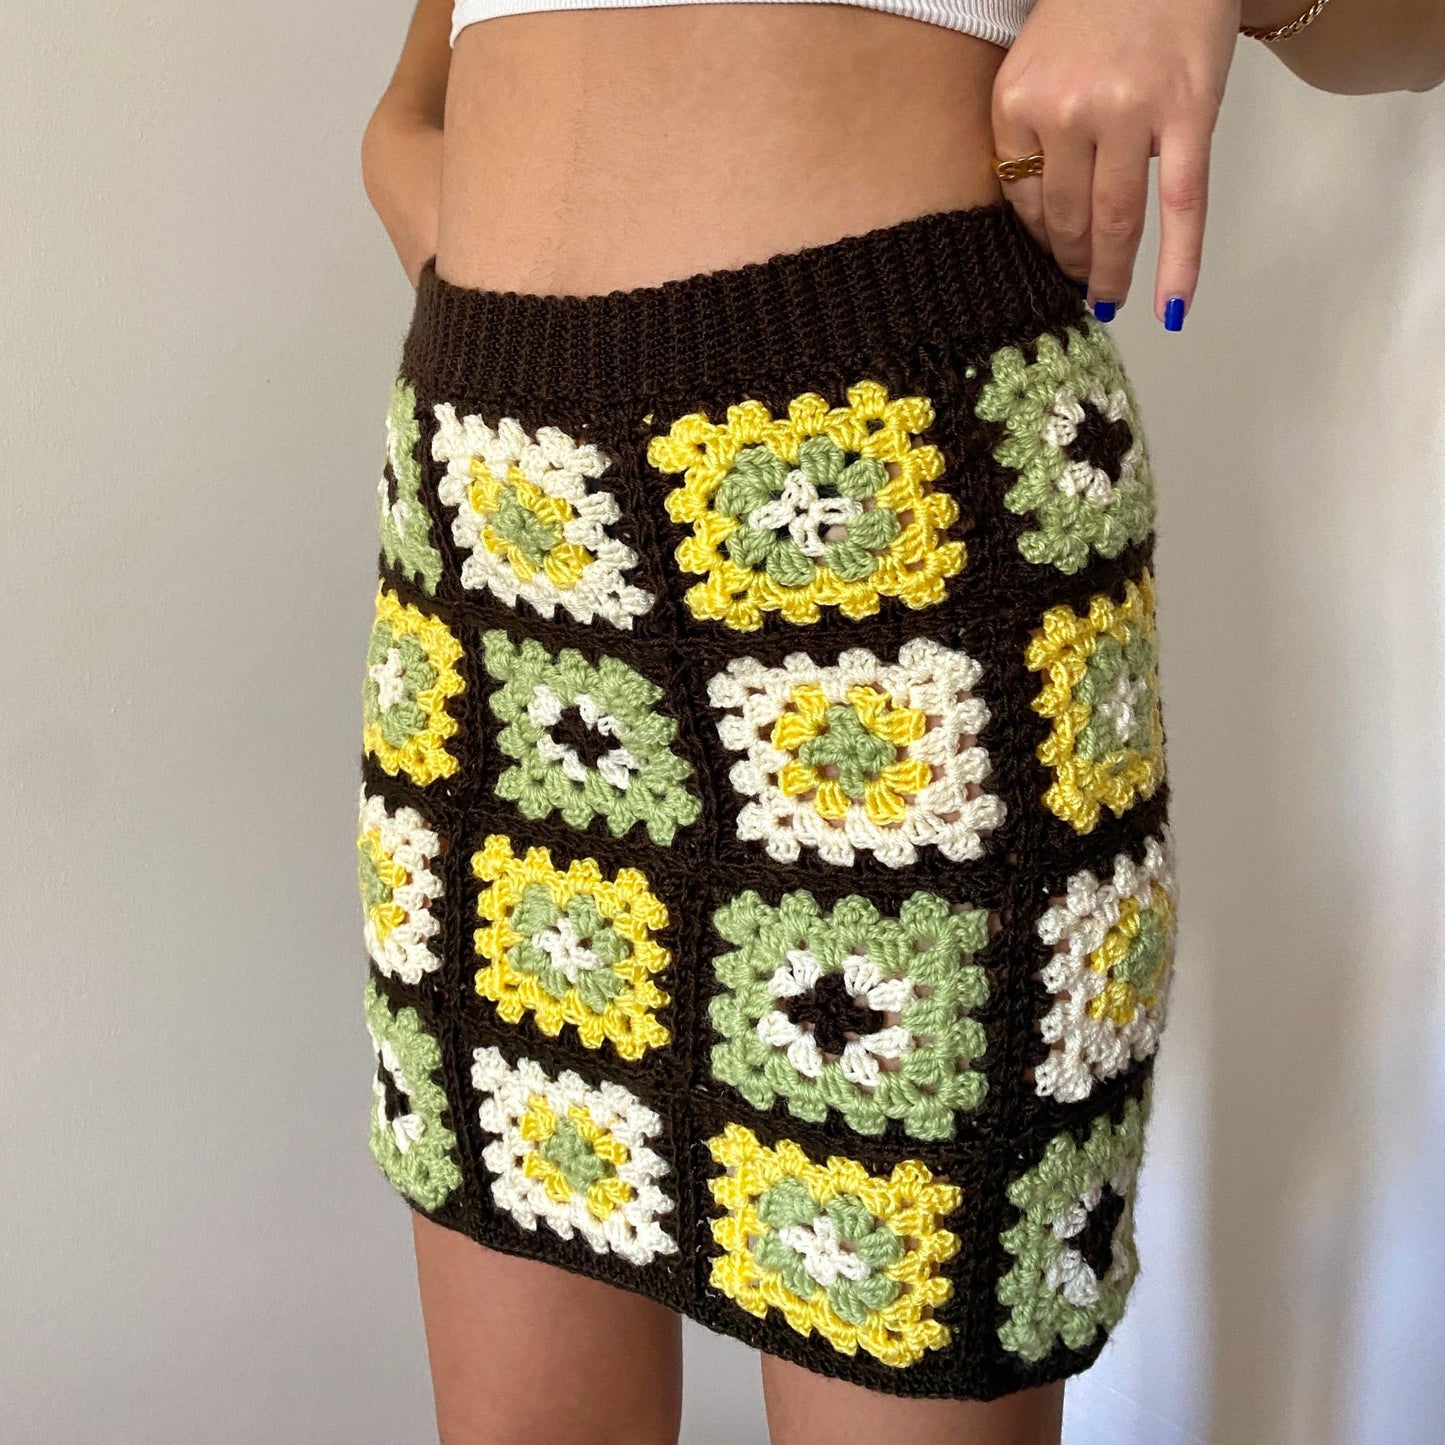 Girl posing in a brown, green, yellow and white crochet granny square skirt